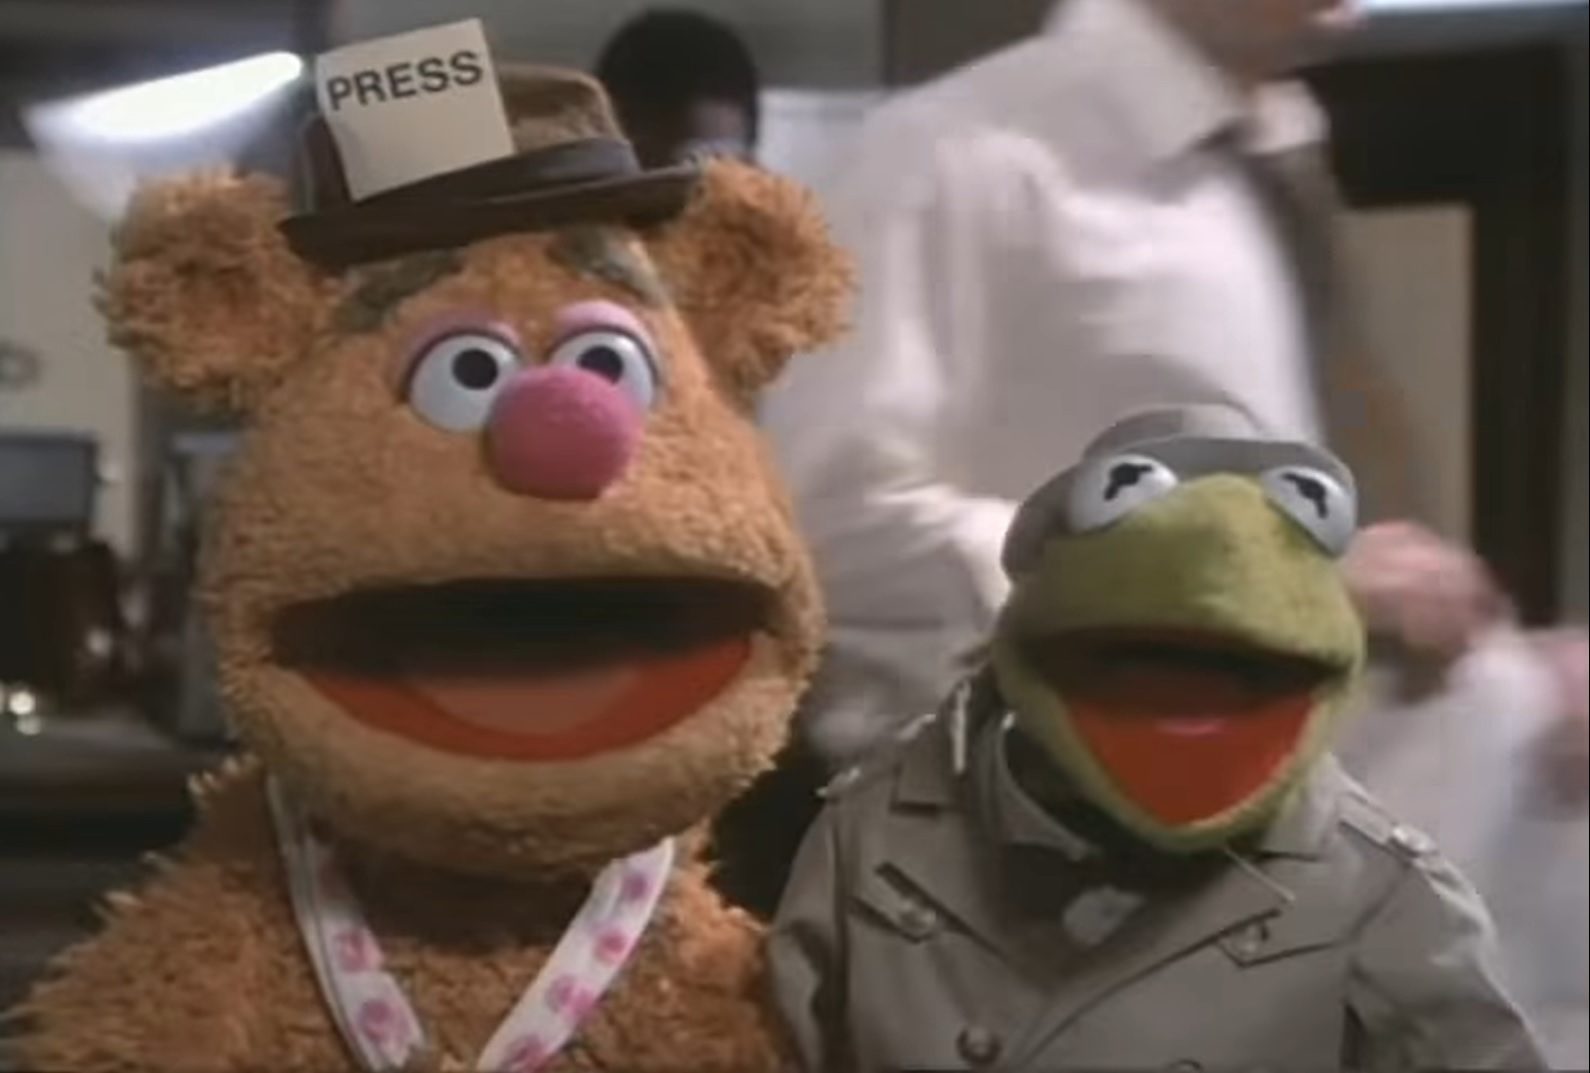 what was the first product advertised by the muppets